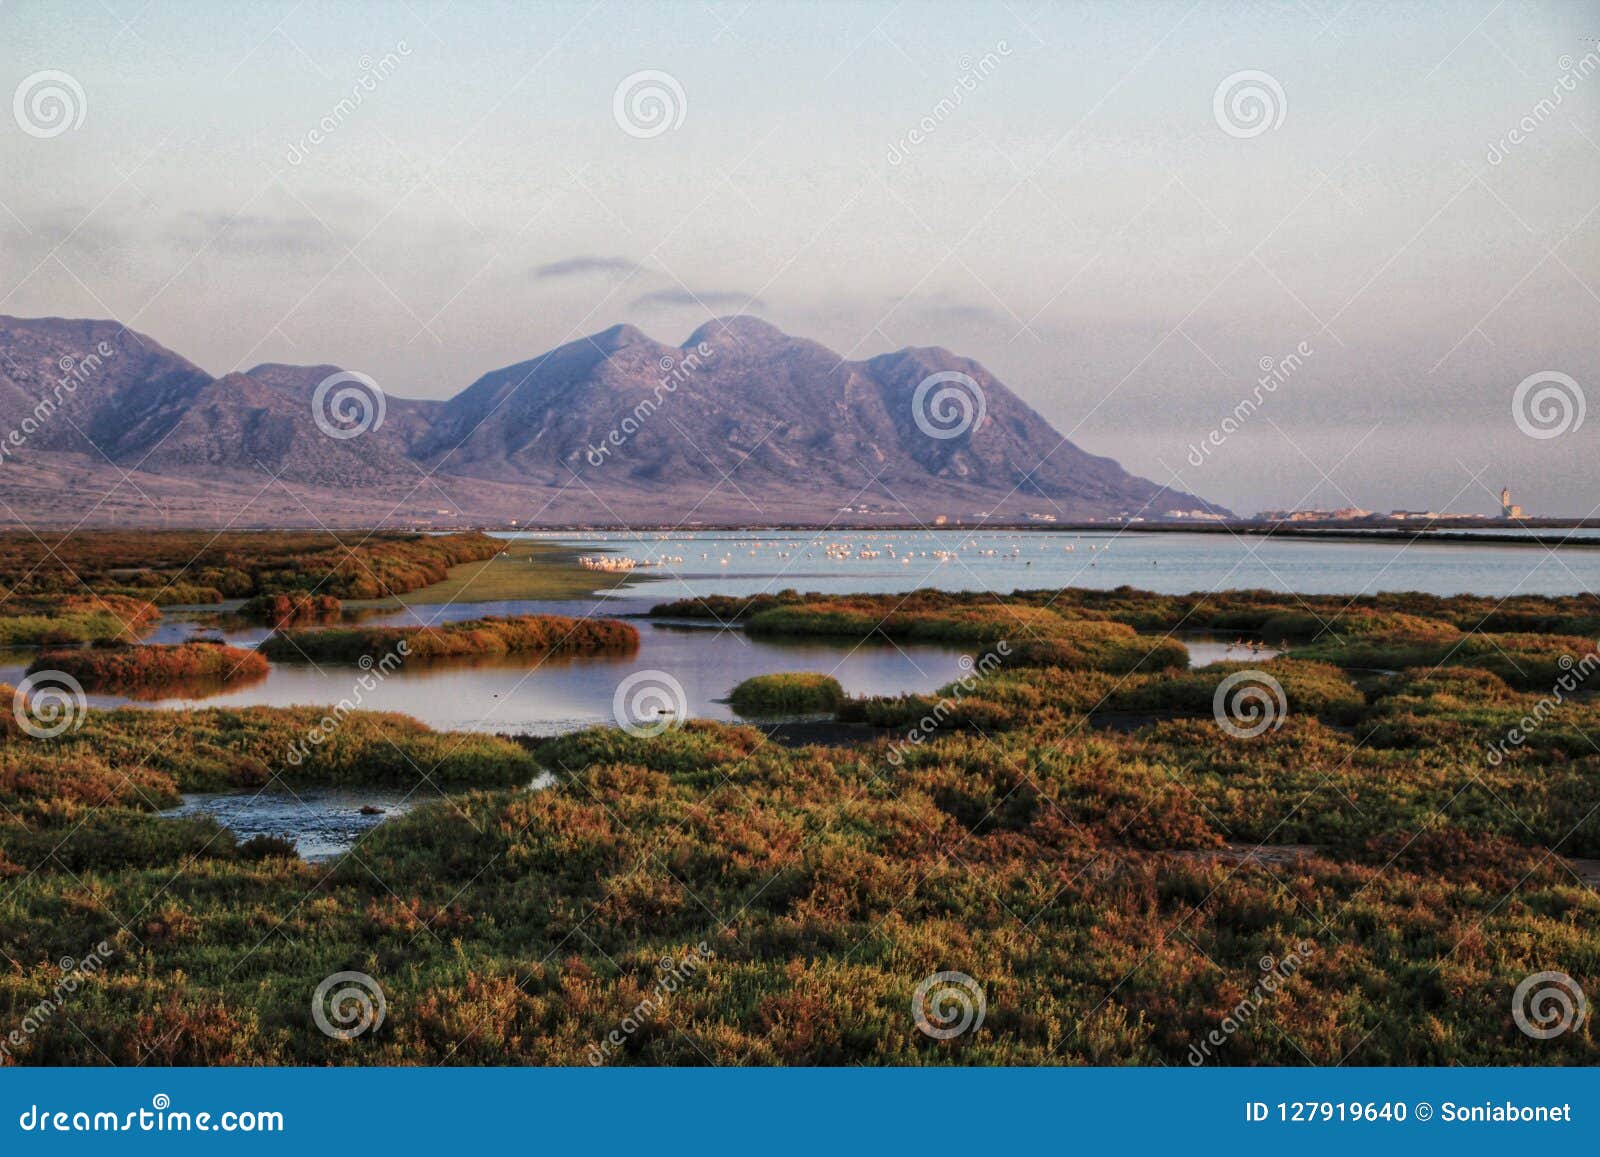 panoramic view of cabo de gata wetlands with pink flamingos in the background